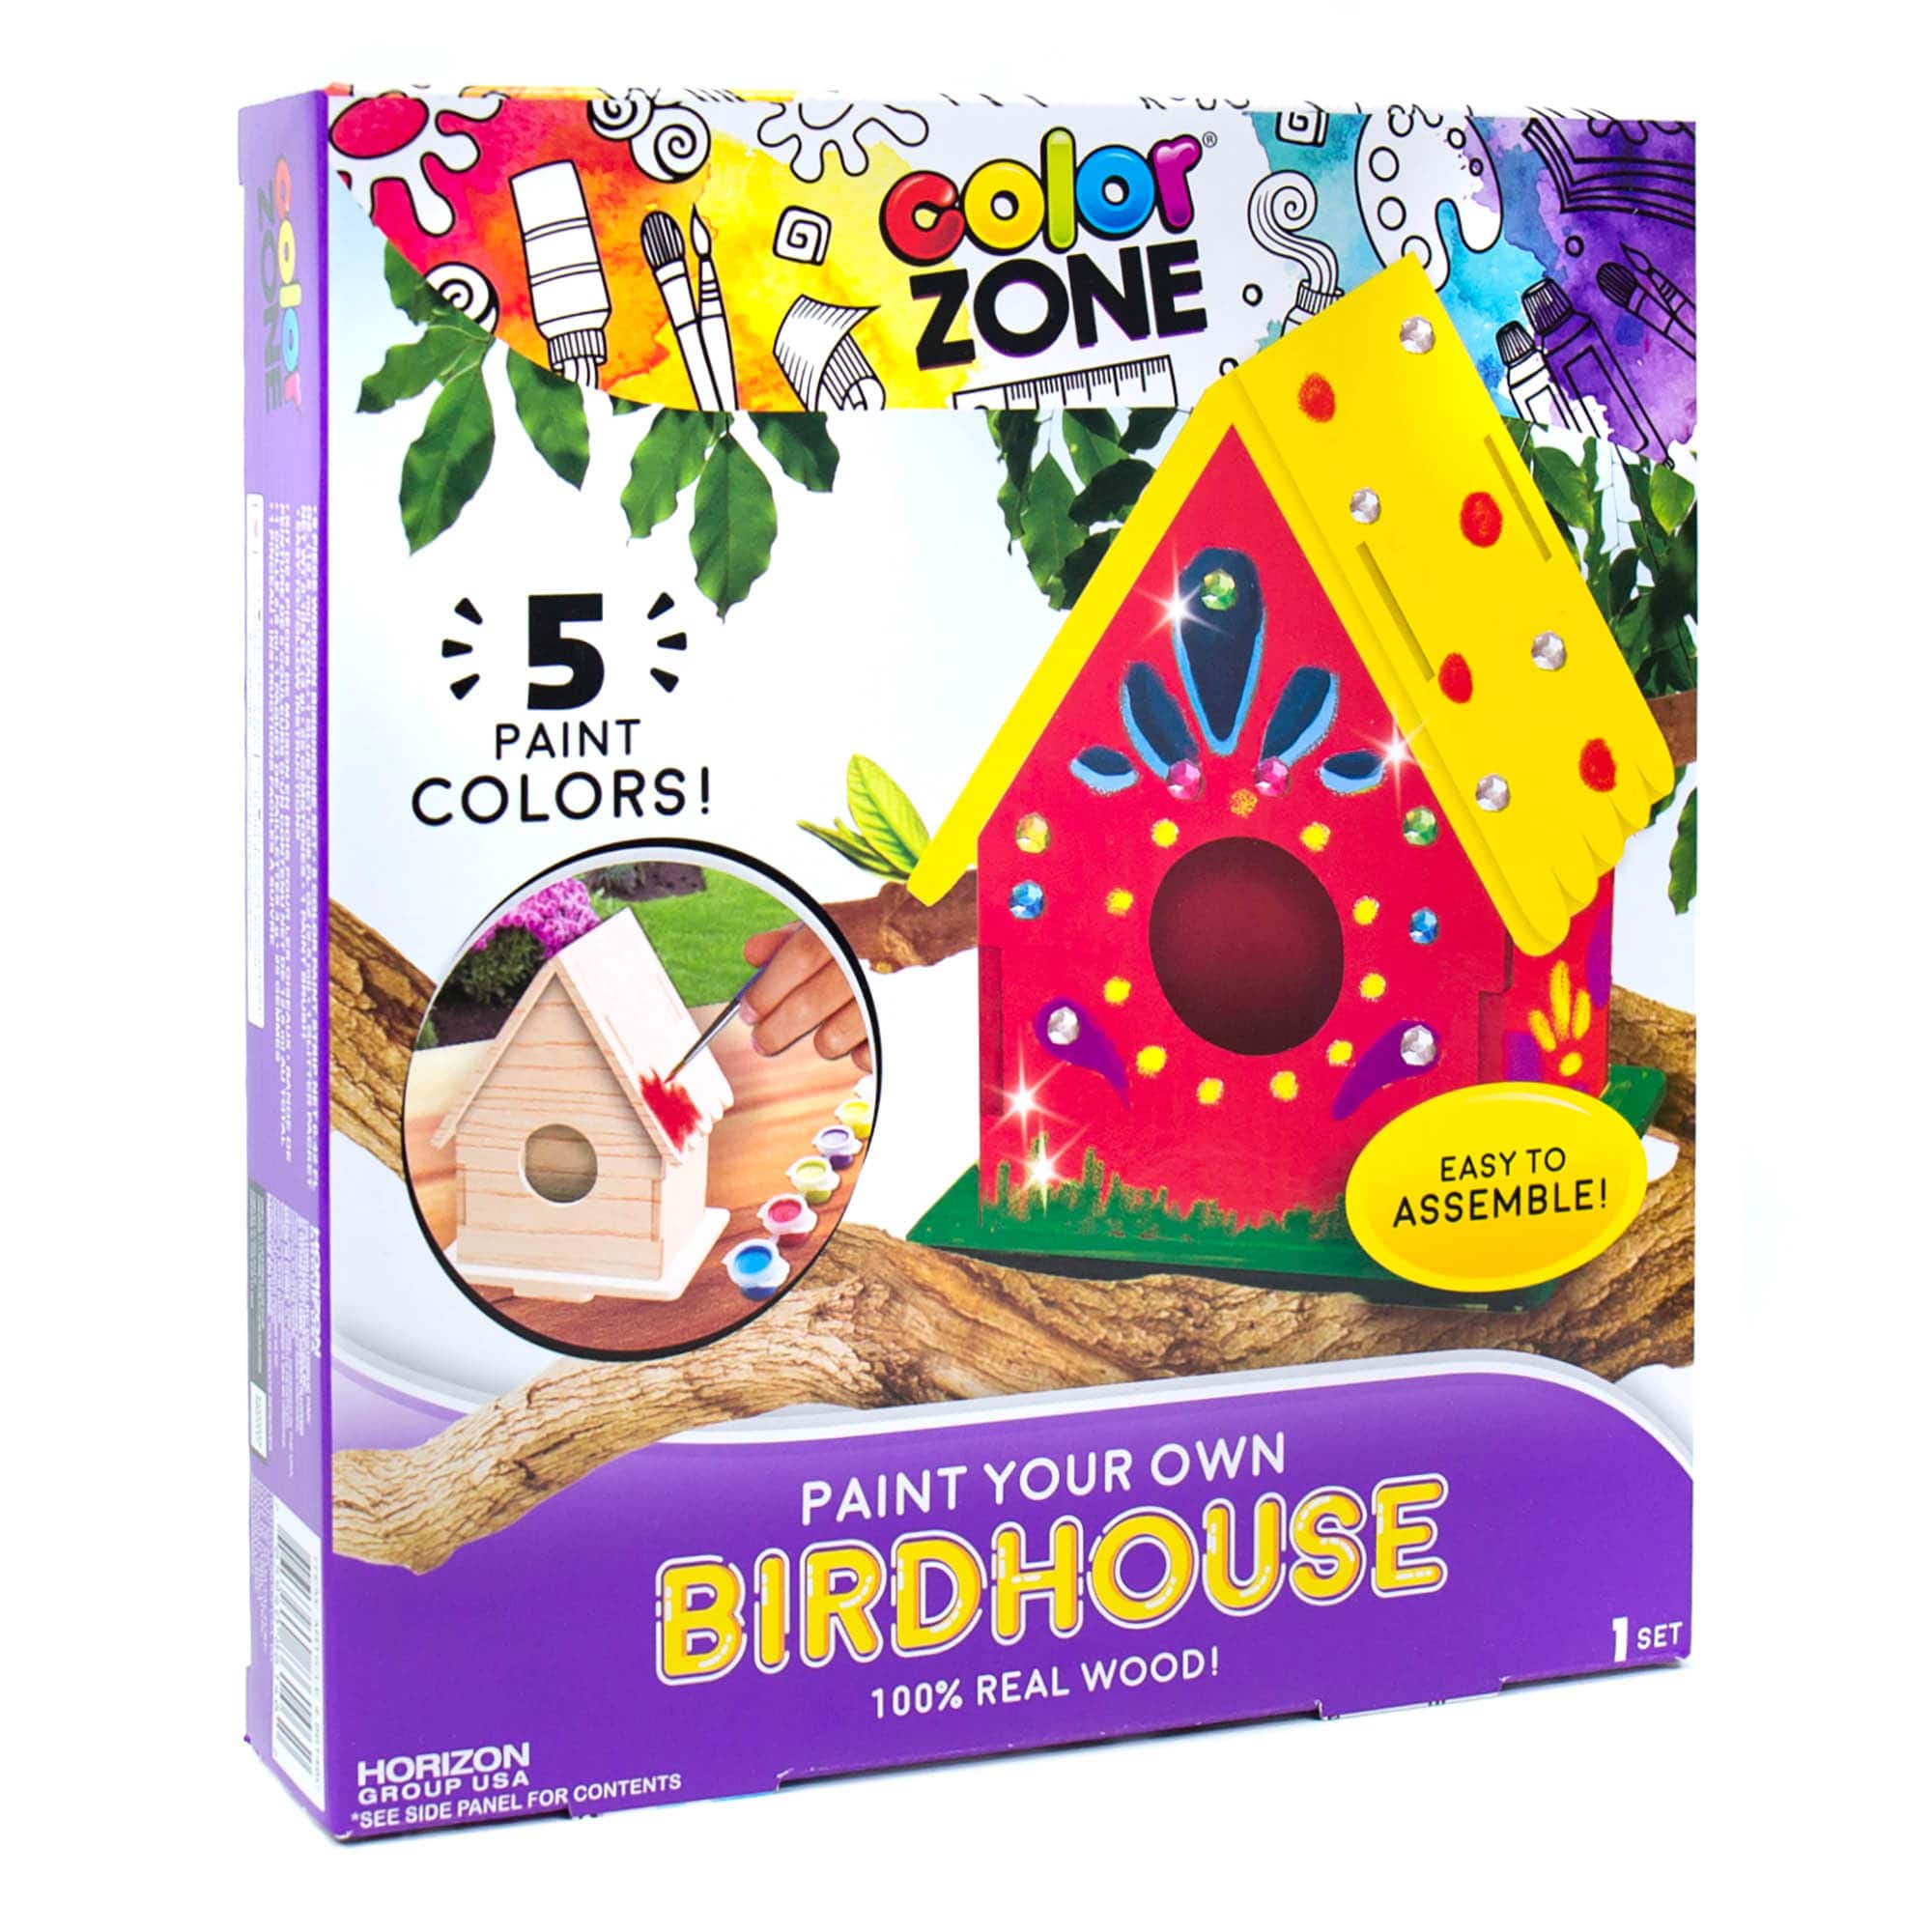 25 Christmas Gift Ideas to Make and Sew - The Yellow Birdhouse